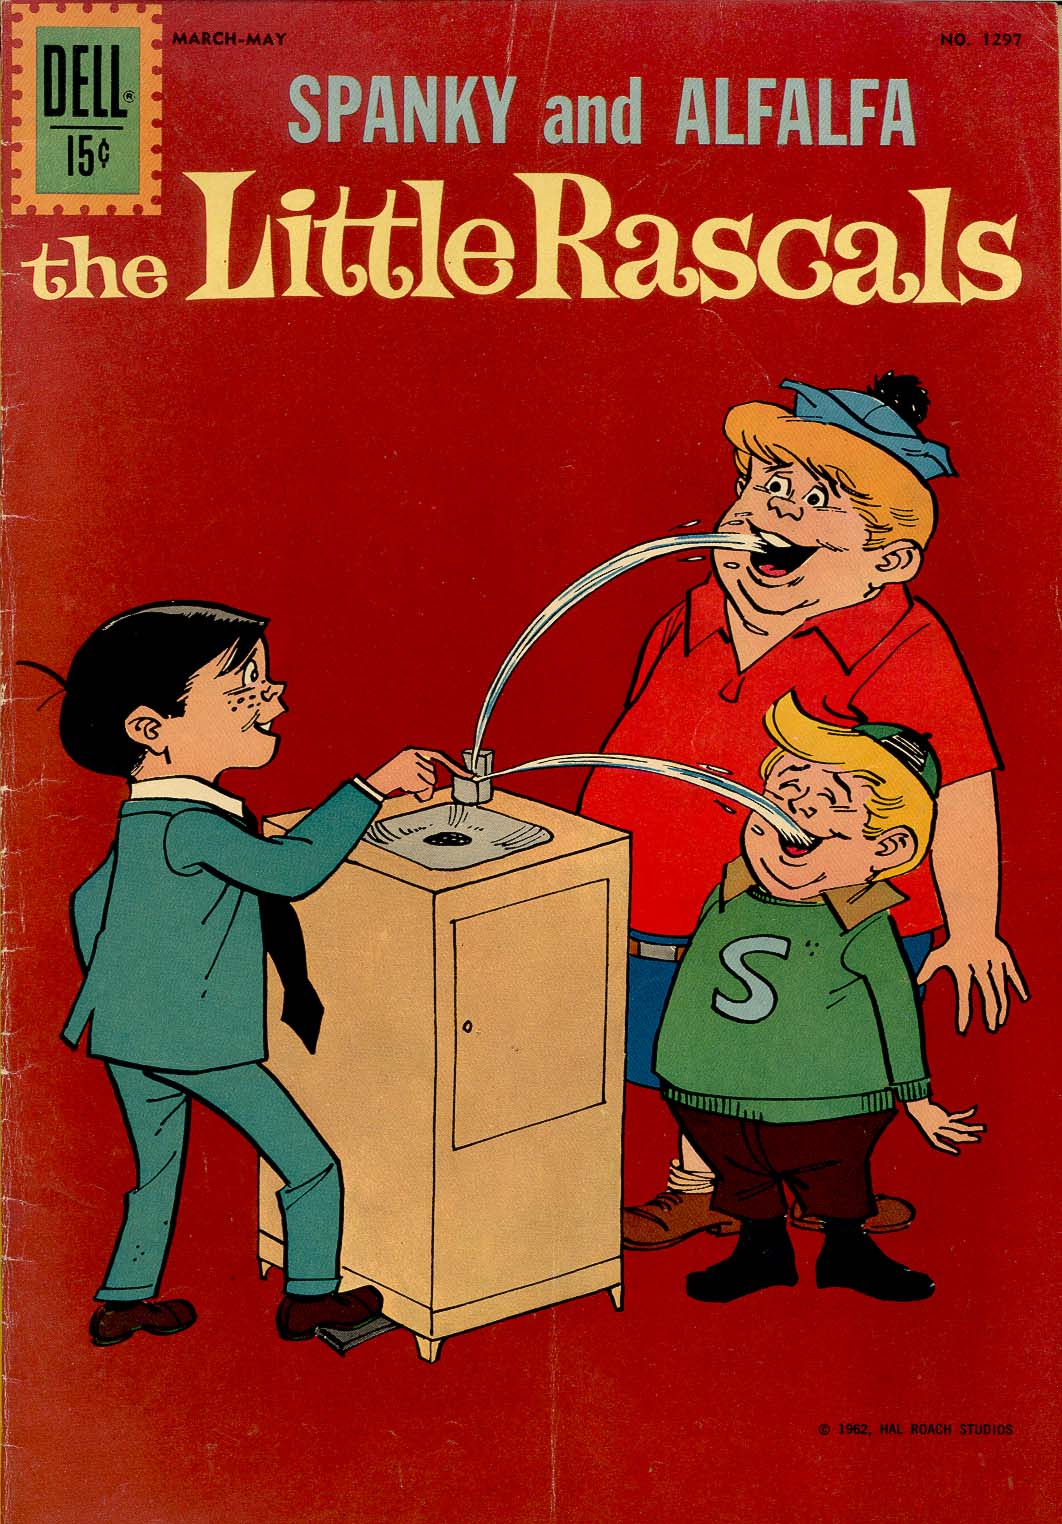 Book Cover For 1297 - The Little Rascals